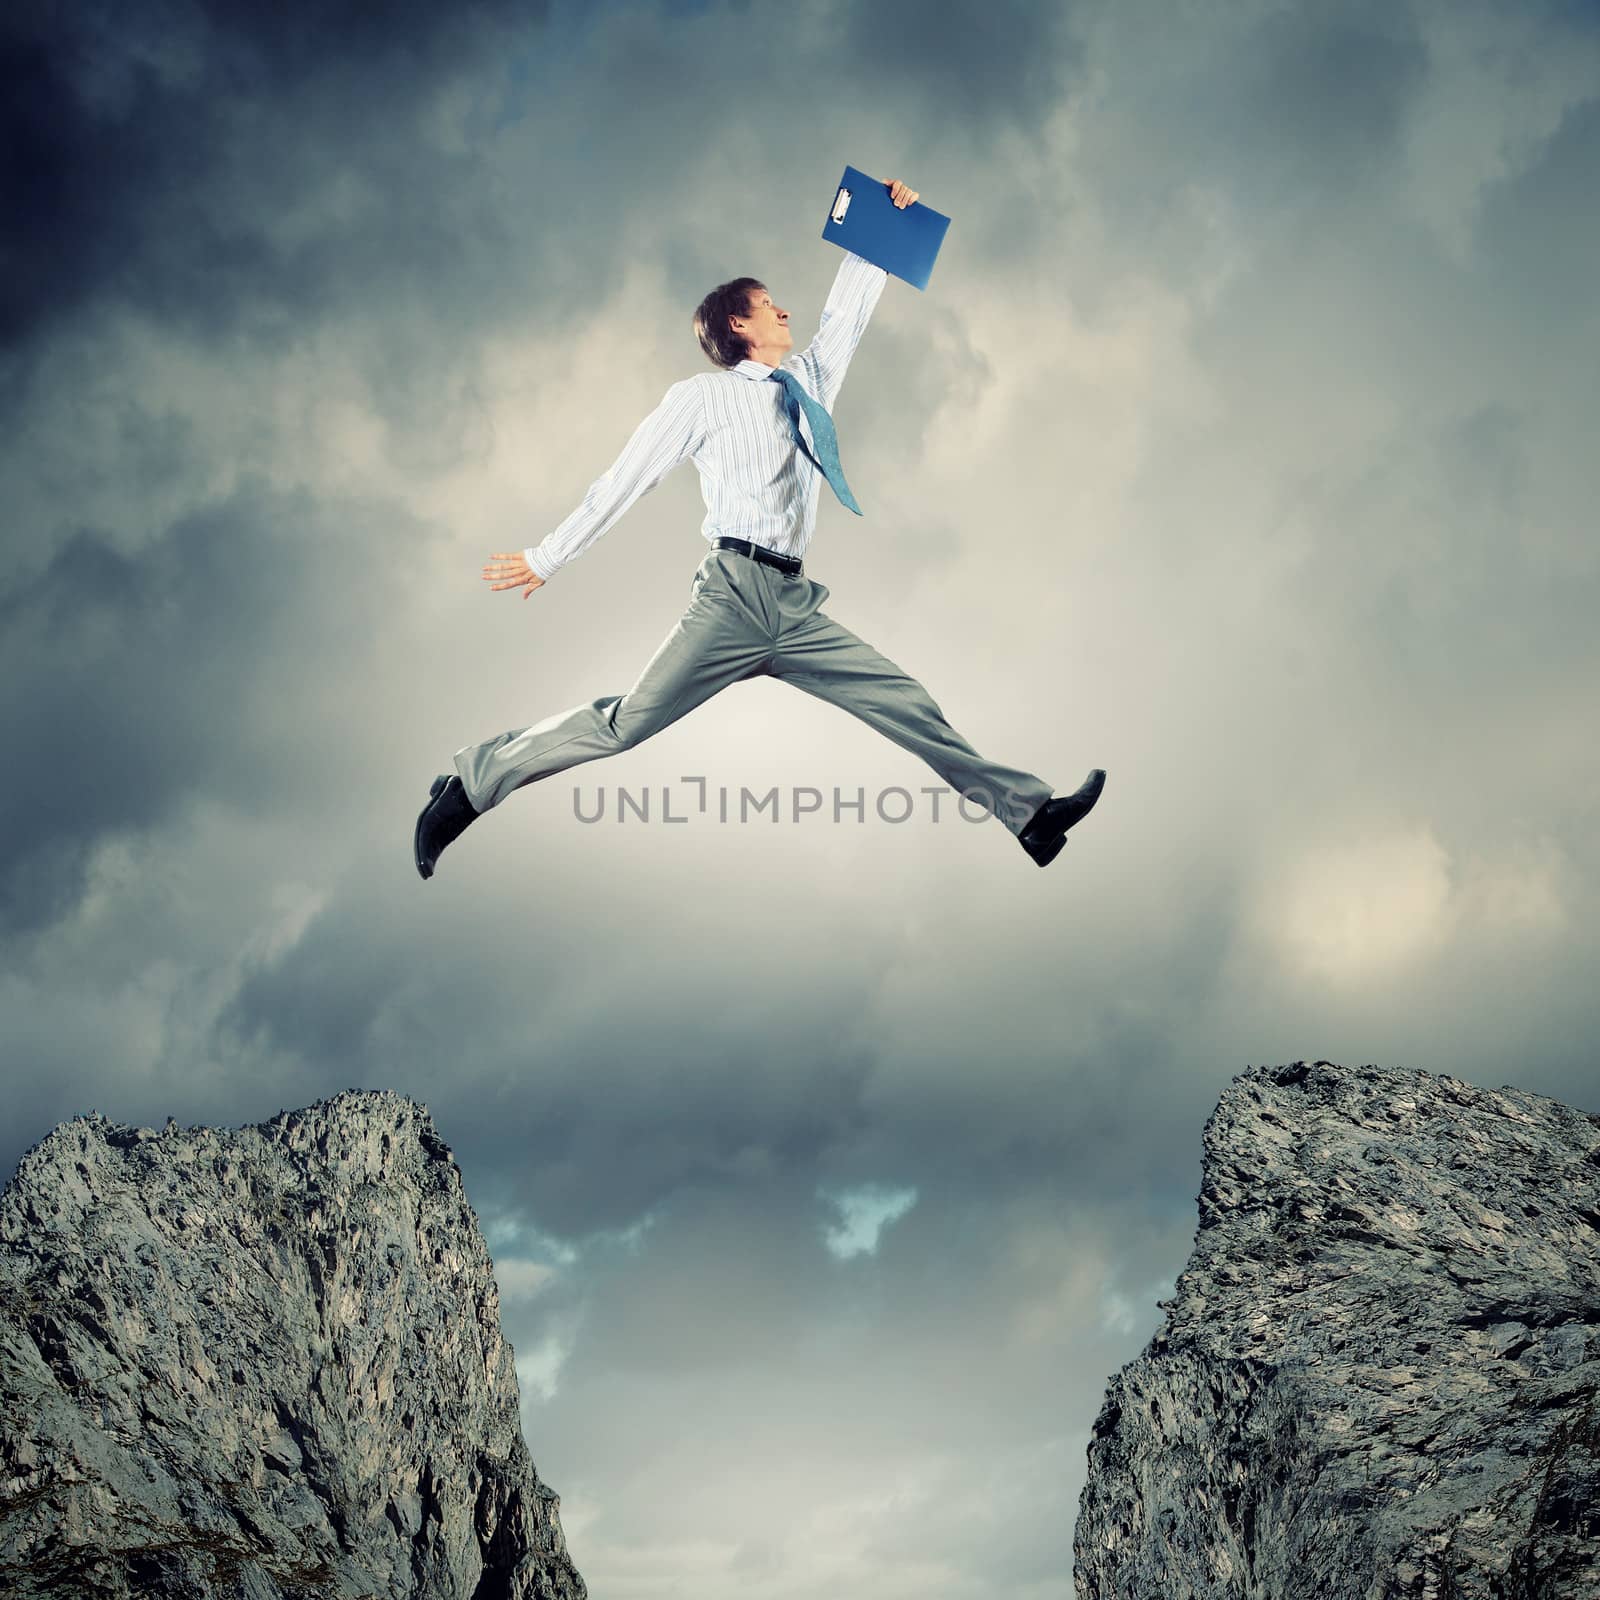 Image of young businessman jumping over gap